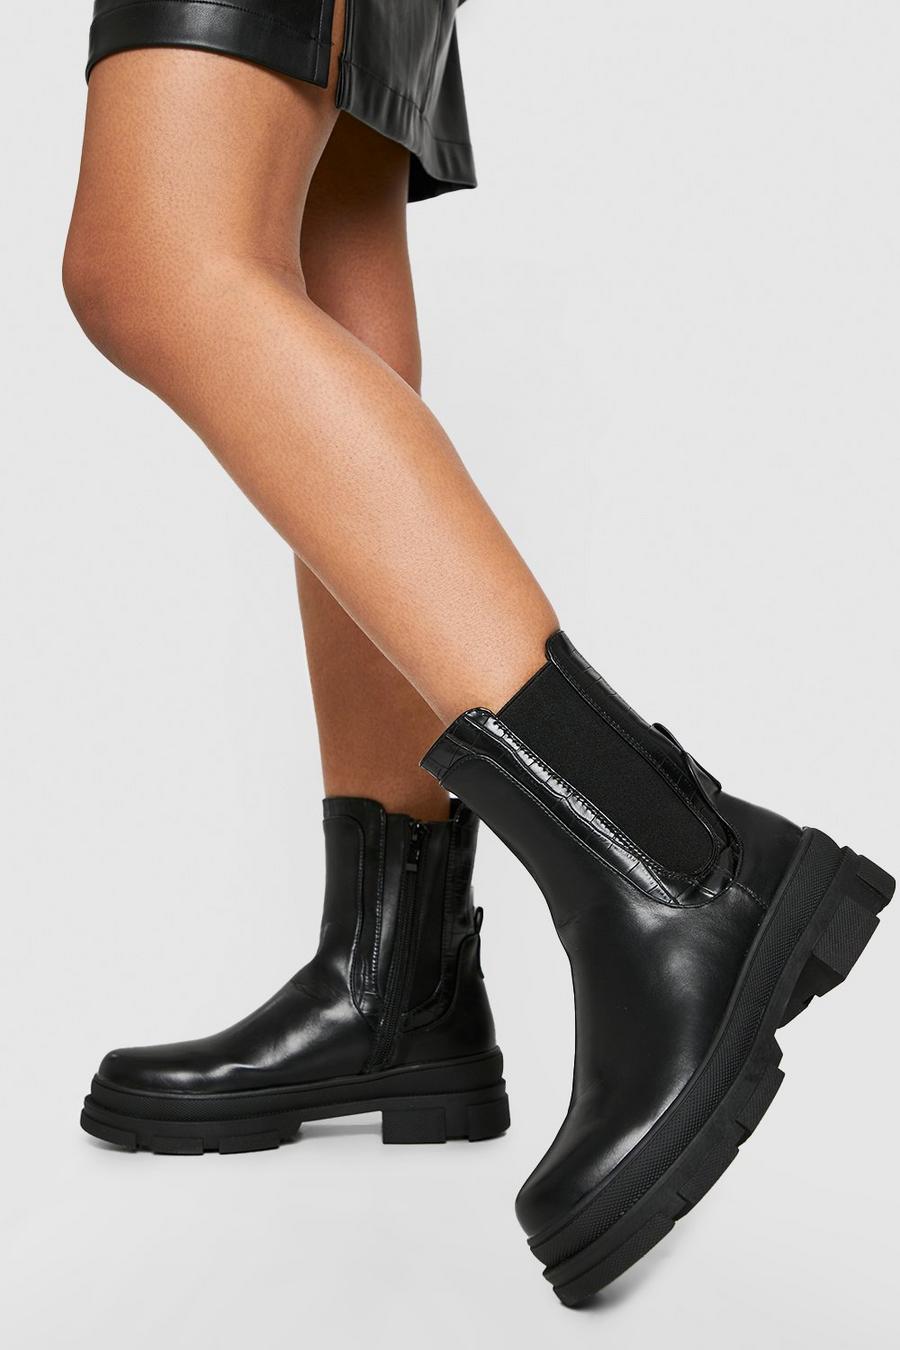 Black rick owens bozo chunky boots item image number 1